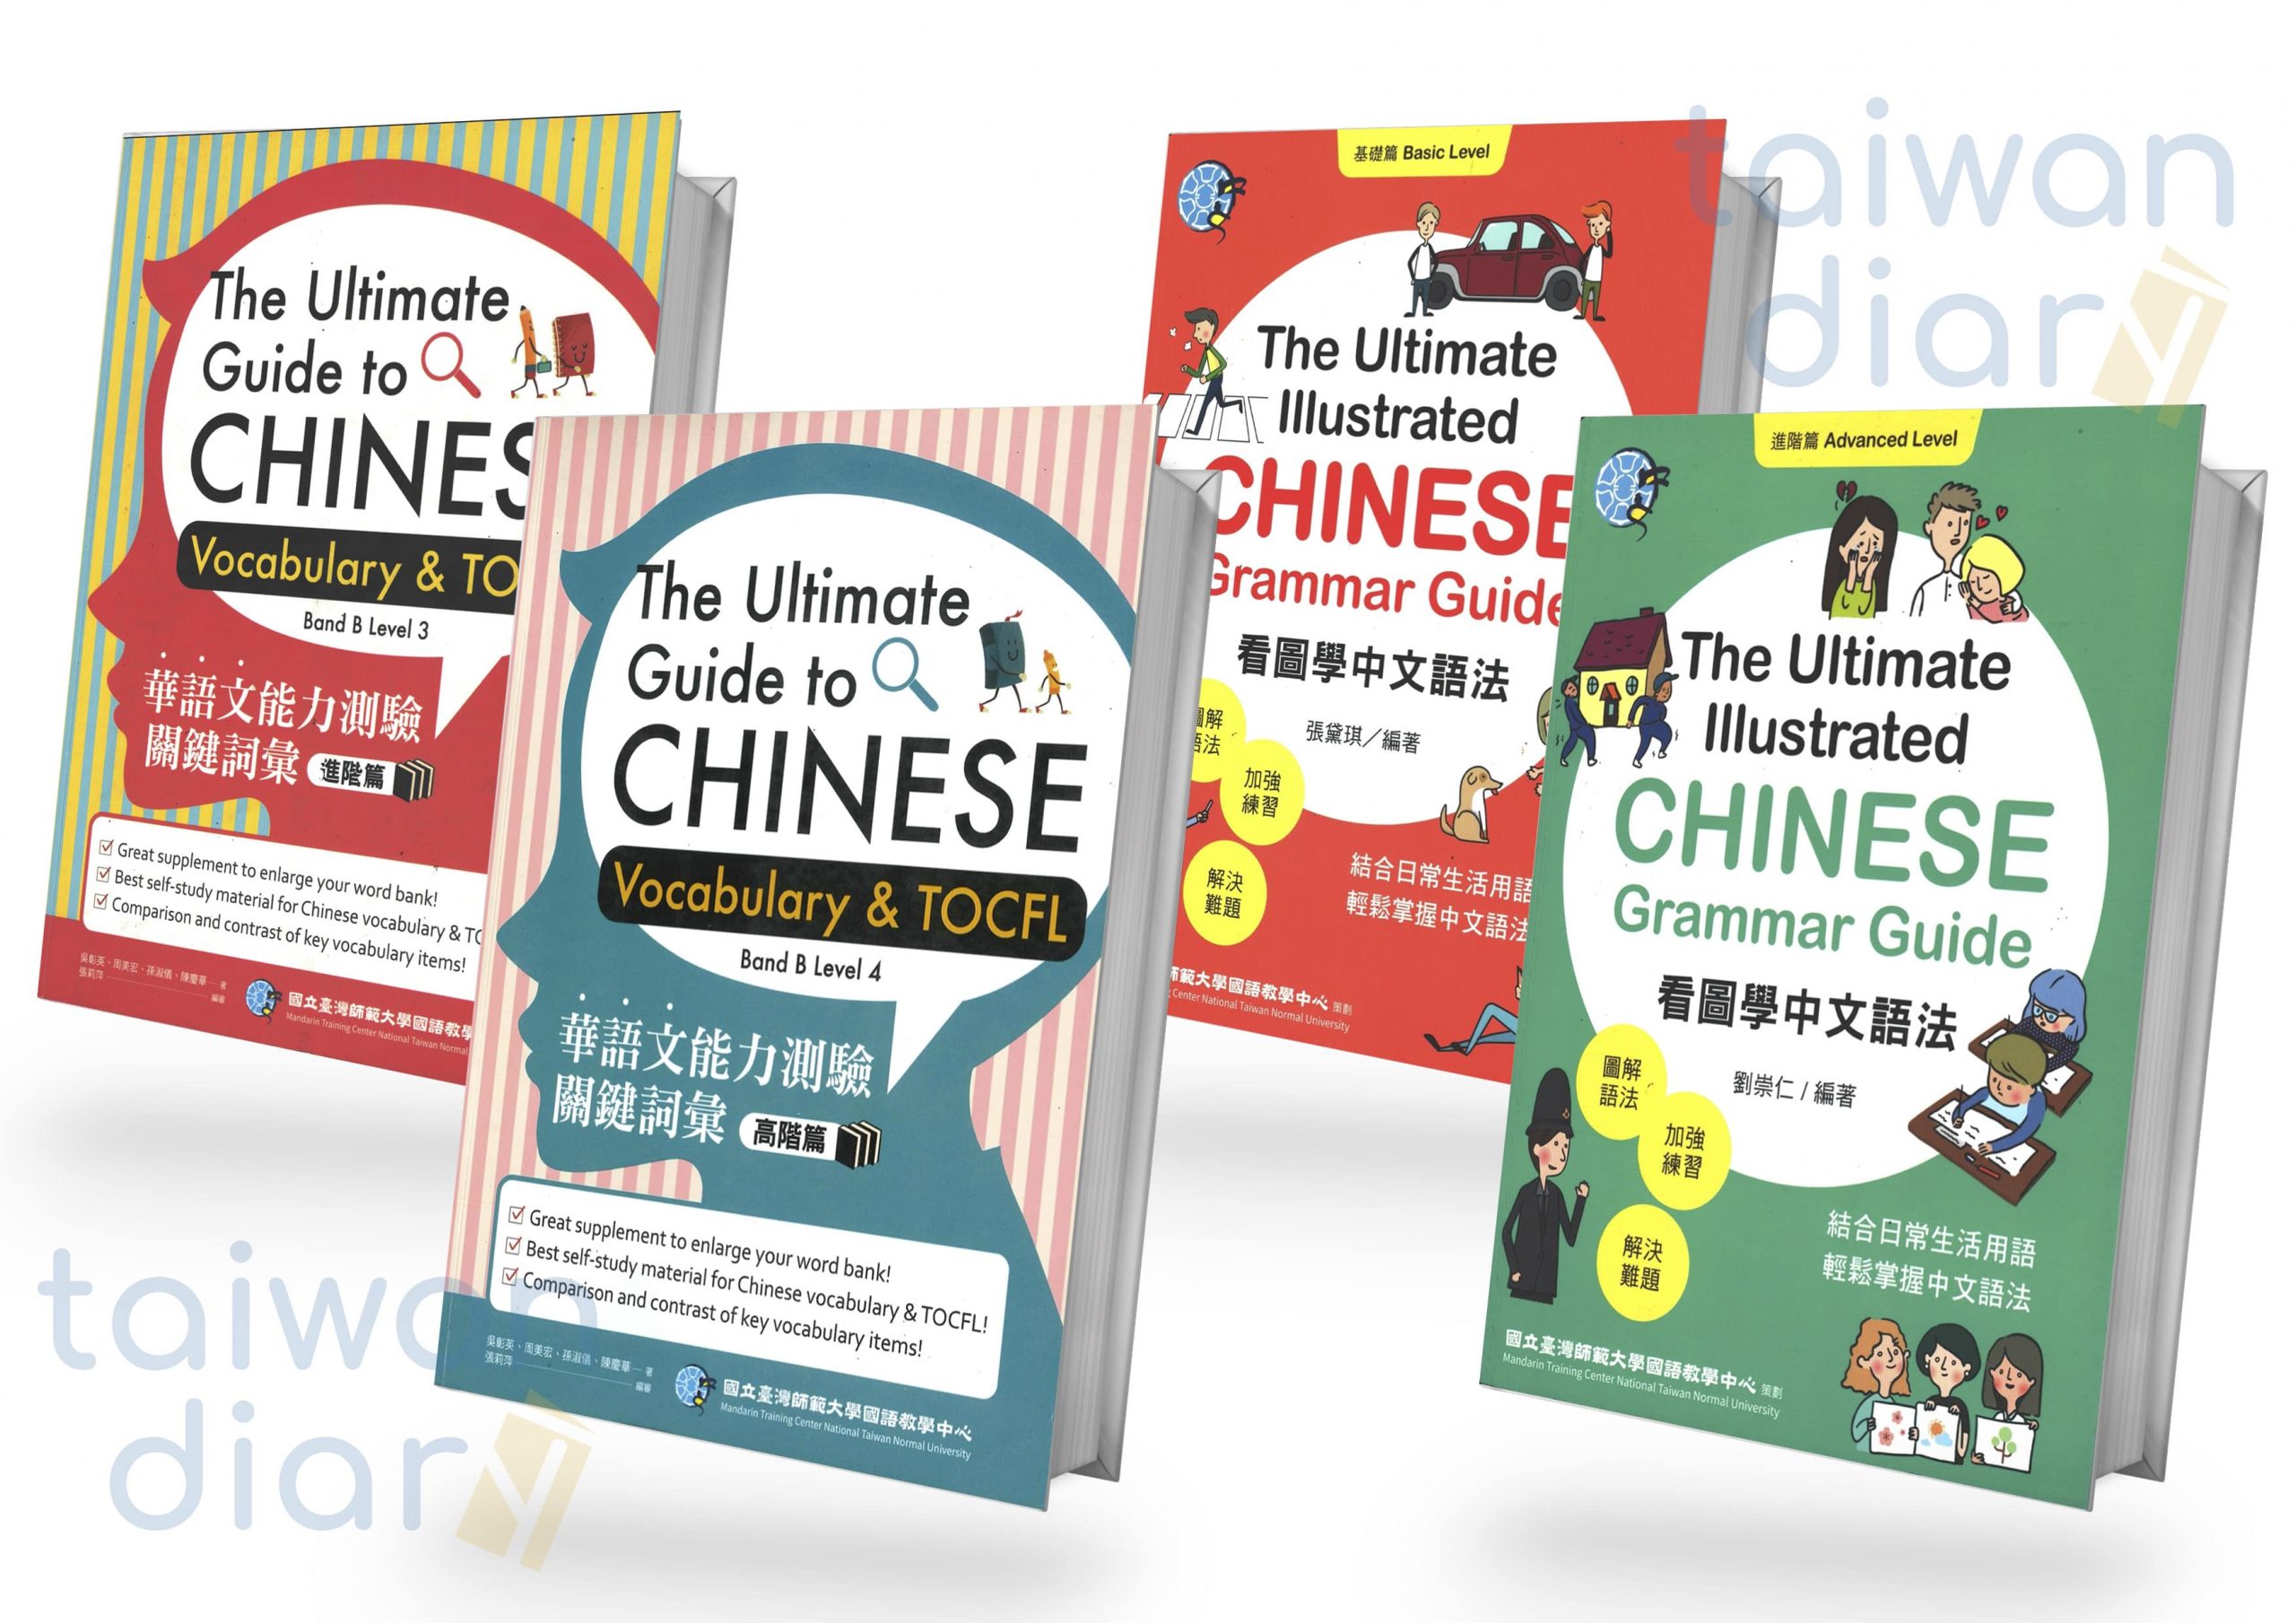 4. Giáo trình tiếng Trung 華語文能力測驗關鍵詞彙 - The Ultimate Guide to Chinese Vocabulary & TOCFL